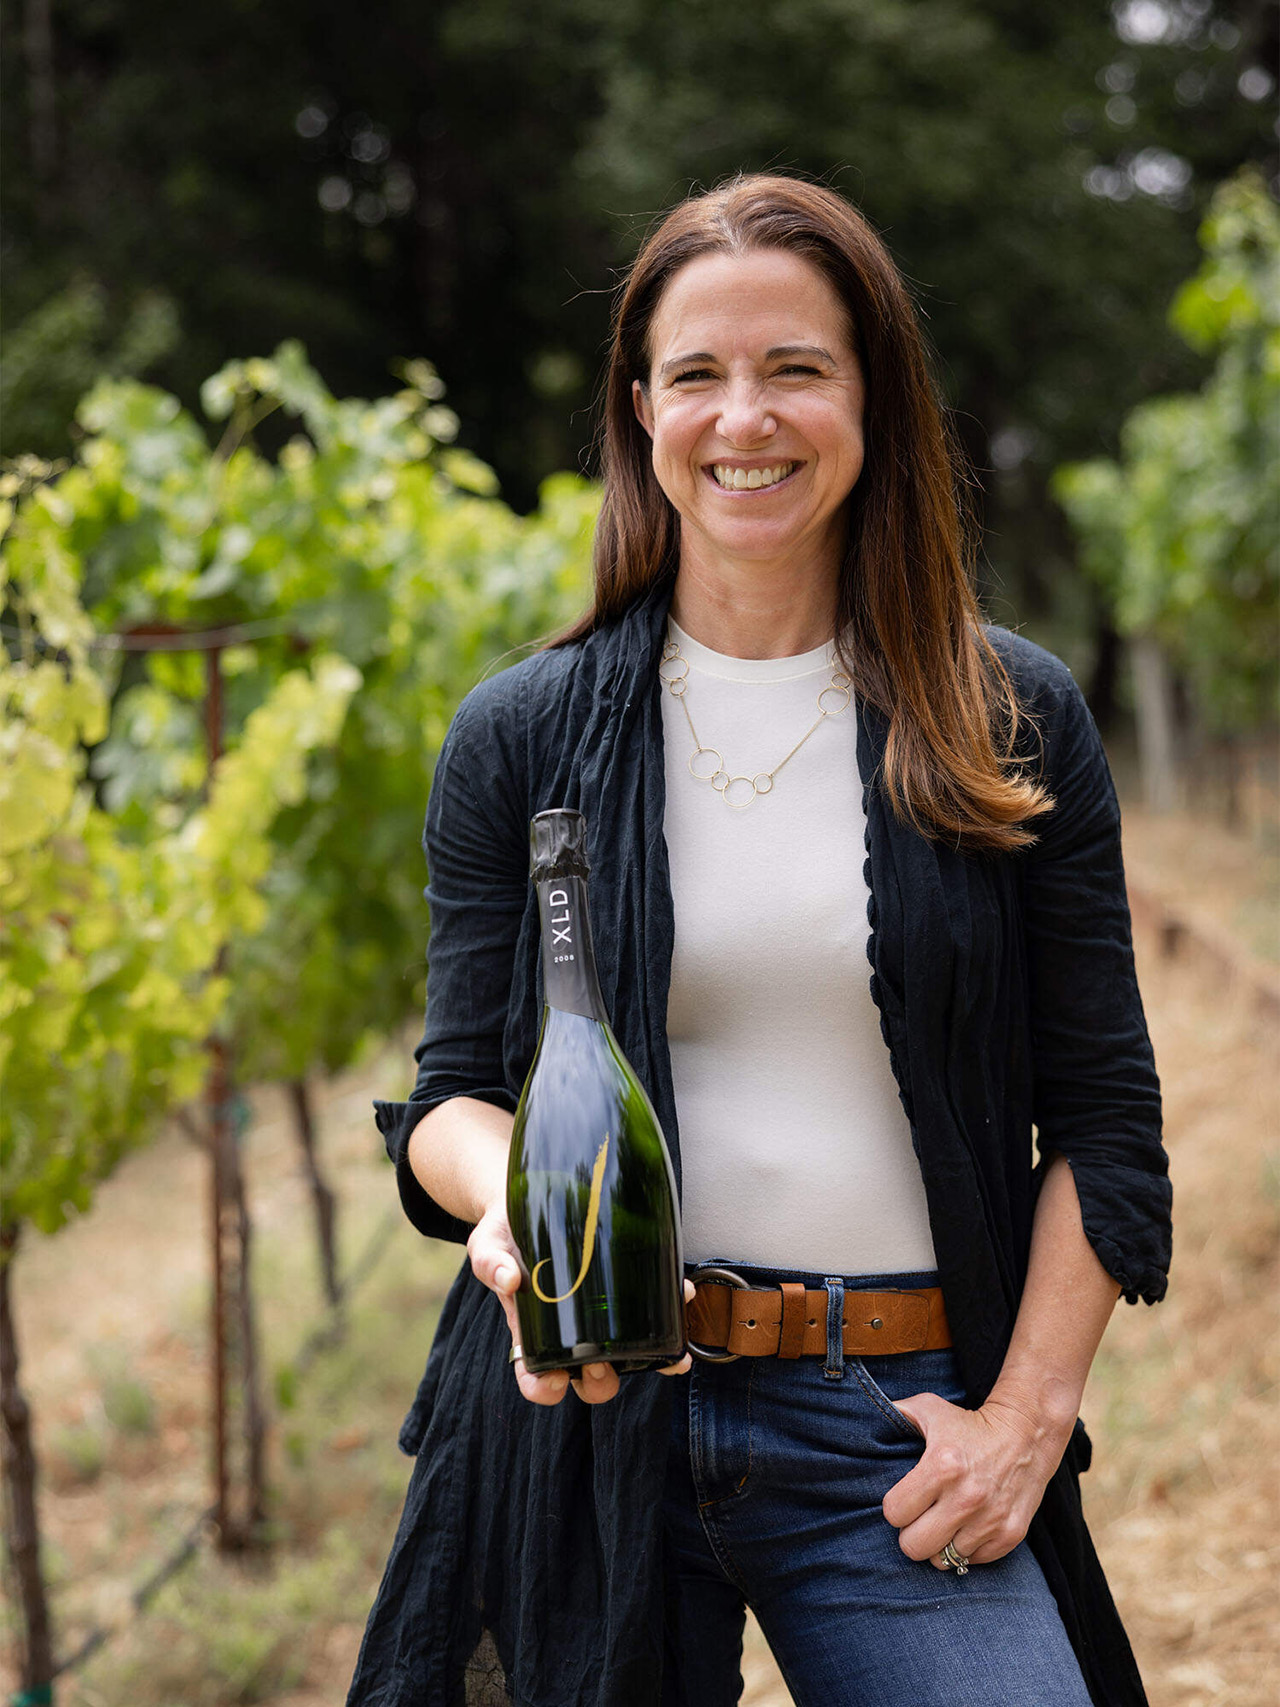 Winemaker, Nicole Hitchcock, standing in a vineyard holding a bottle of J Wine.